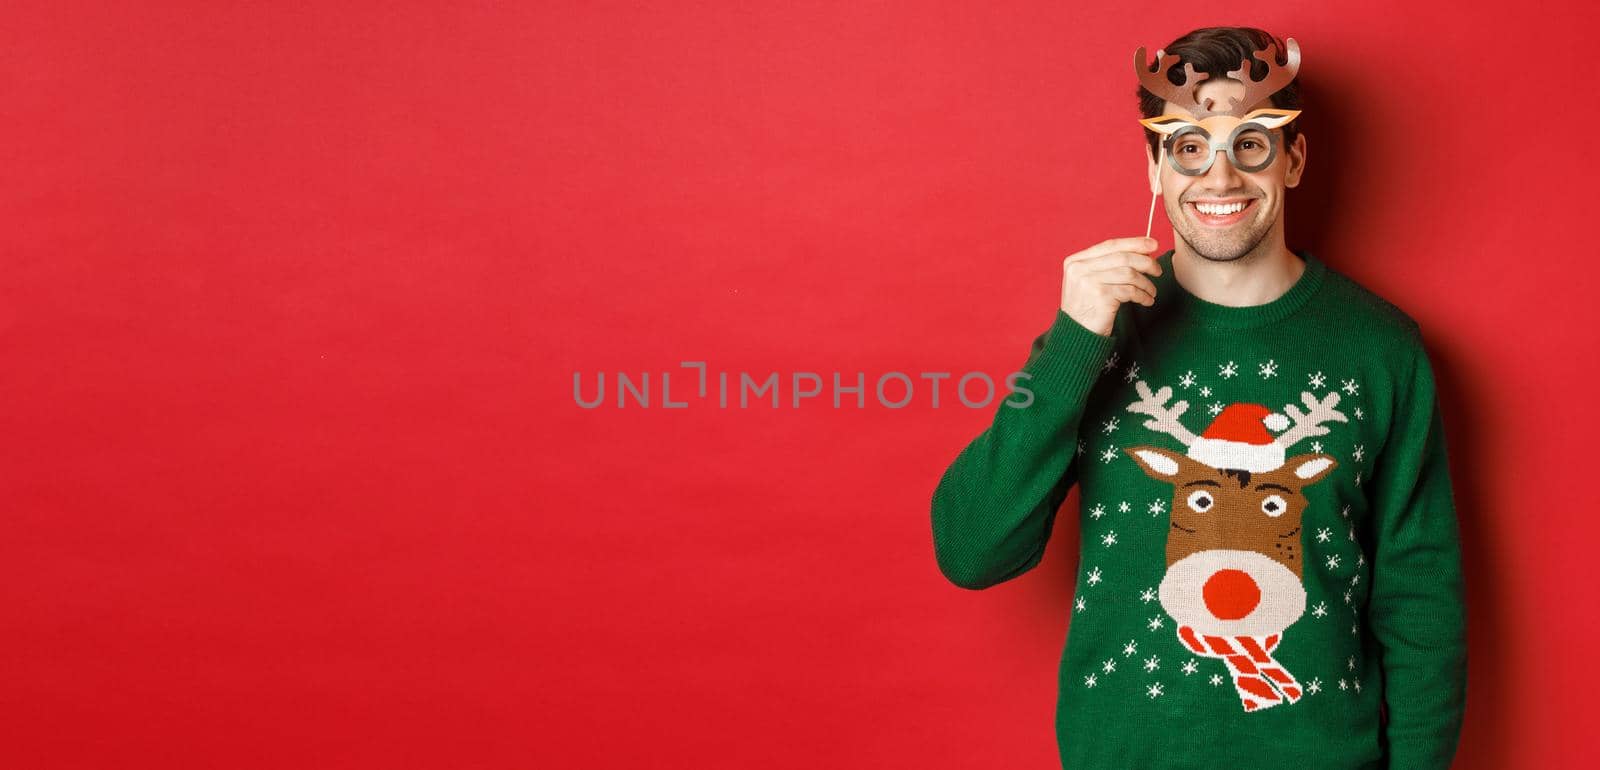 Handsome happy man in christmas sweater, holding party mask and smiling, enjoying new year celebration, standing over red background.